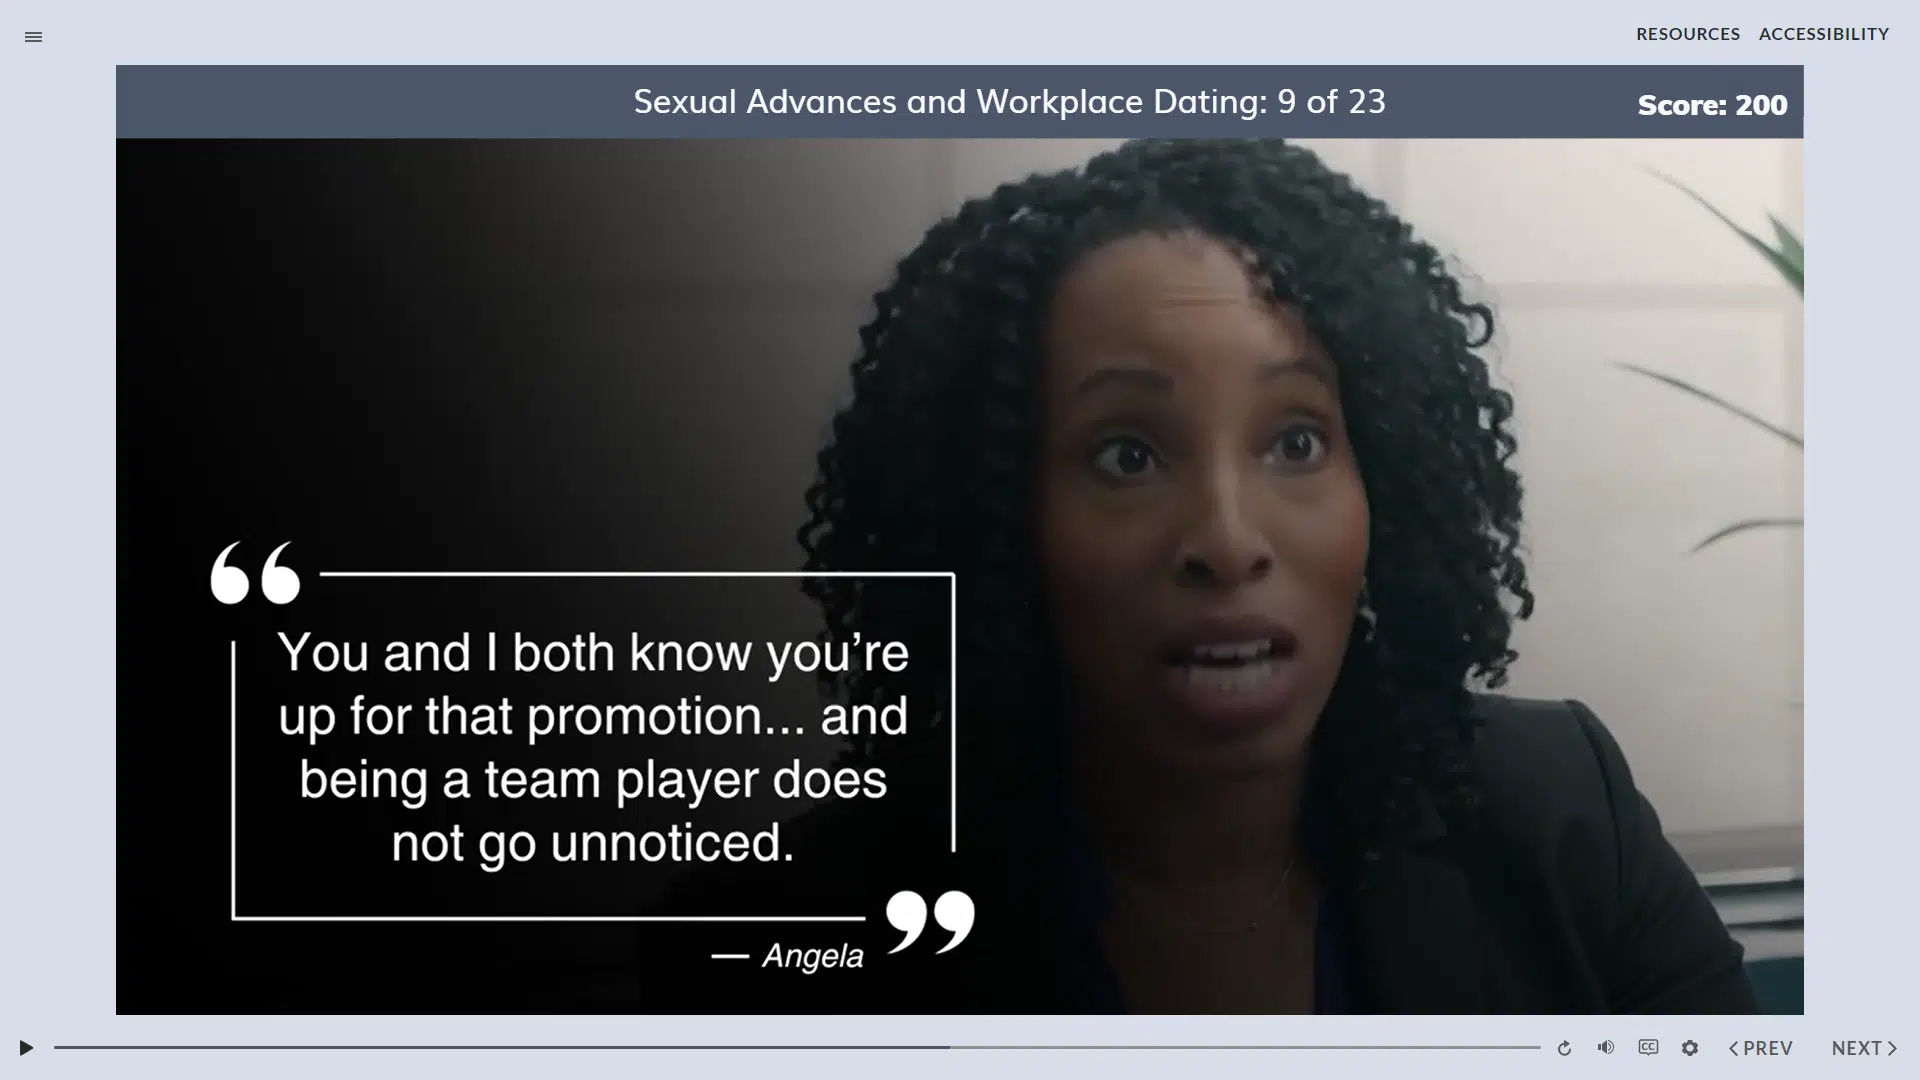 inappropriate advances in the workplace training quote